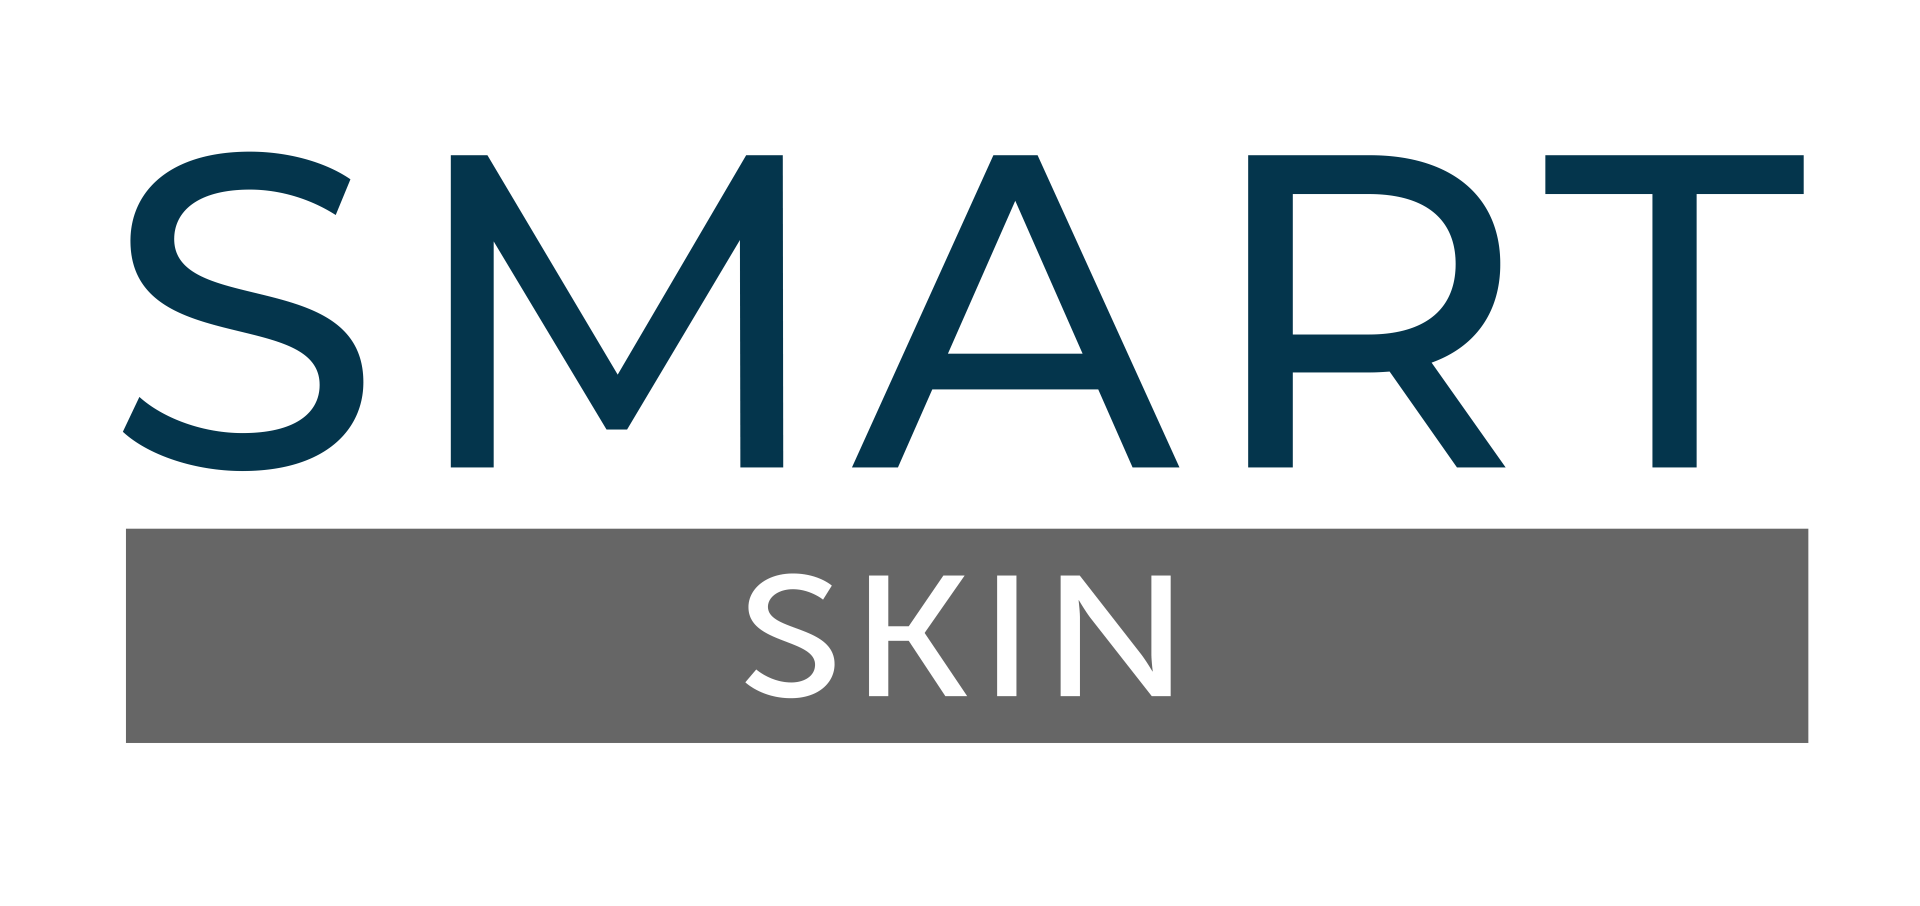 A logo for smart skin is shown on a white background.